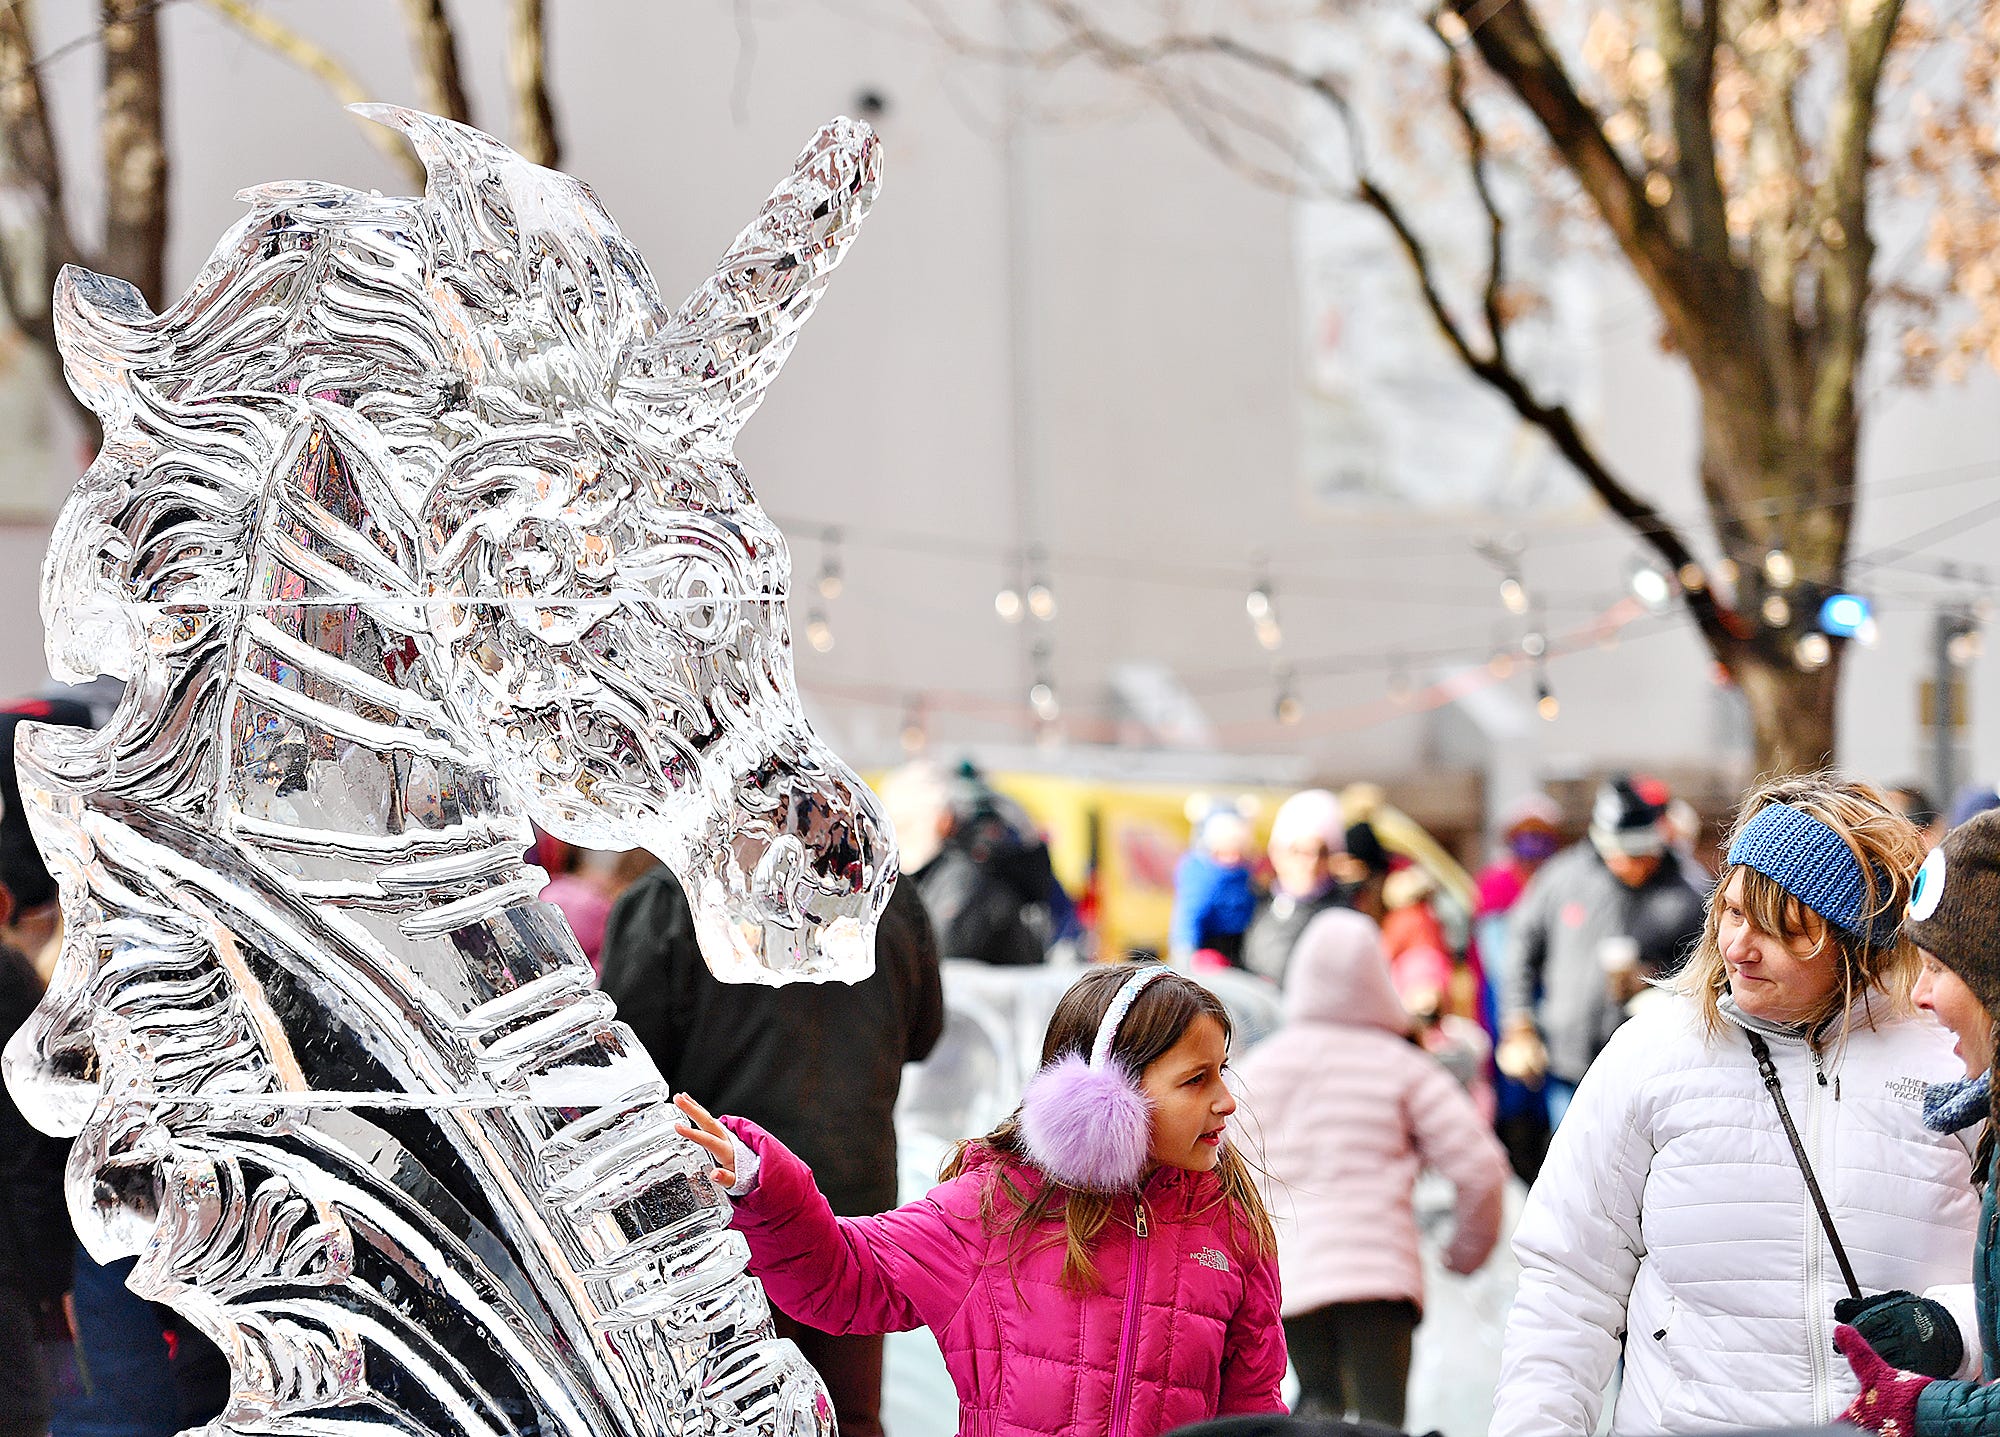 One of many ice sculptures on display during the 8th annual FestivICE event in downtown York City, Saturday, Jan. 15, 2022. Dawn J. Sagert photo